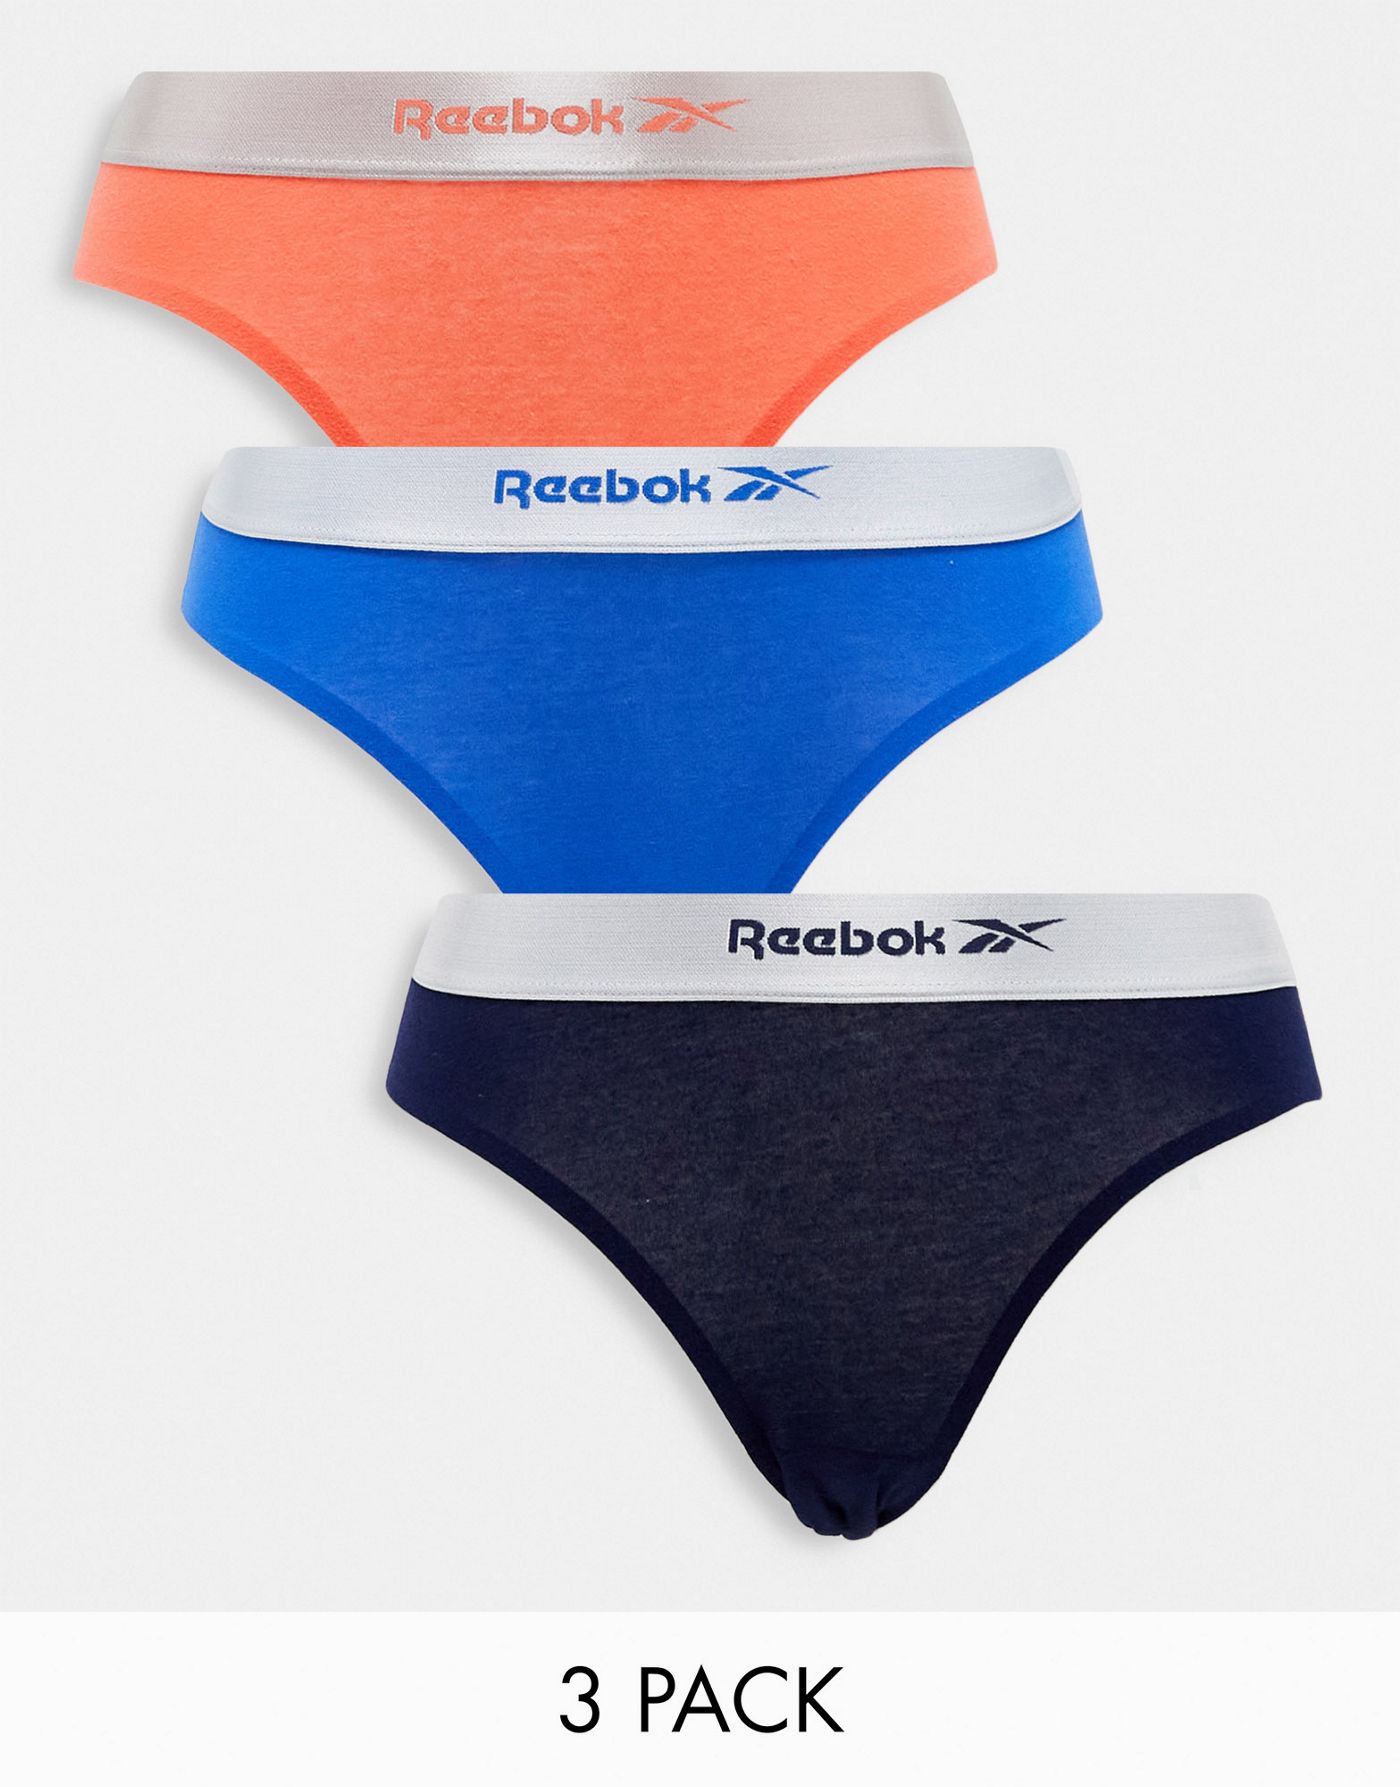 Reebok lacy 3 pack briefs with shine banding in blue navy and orange